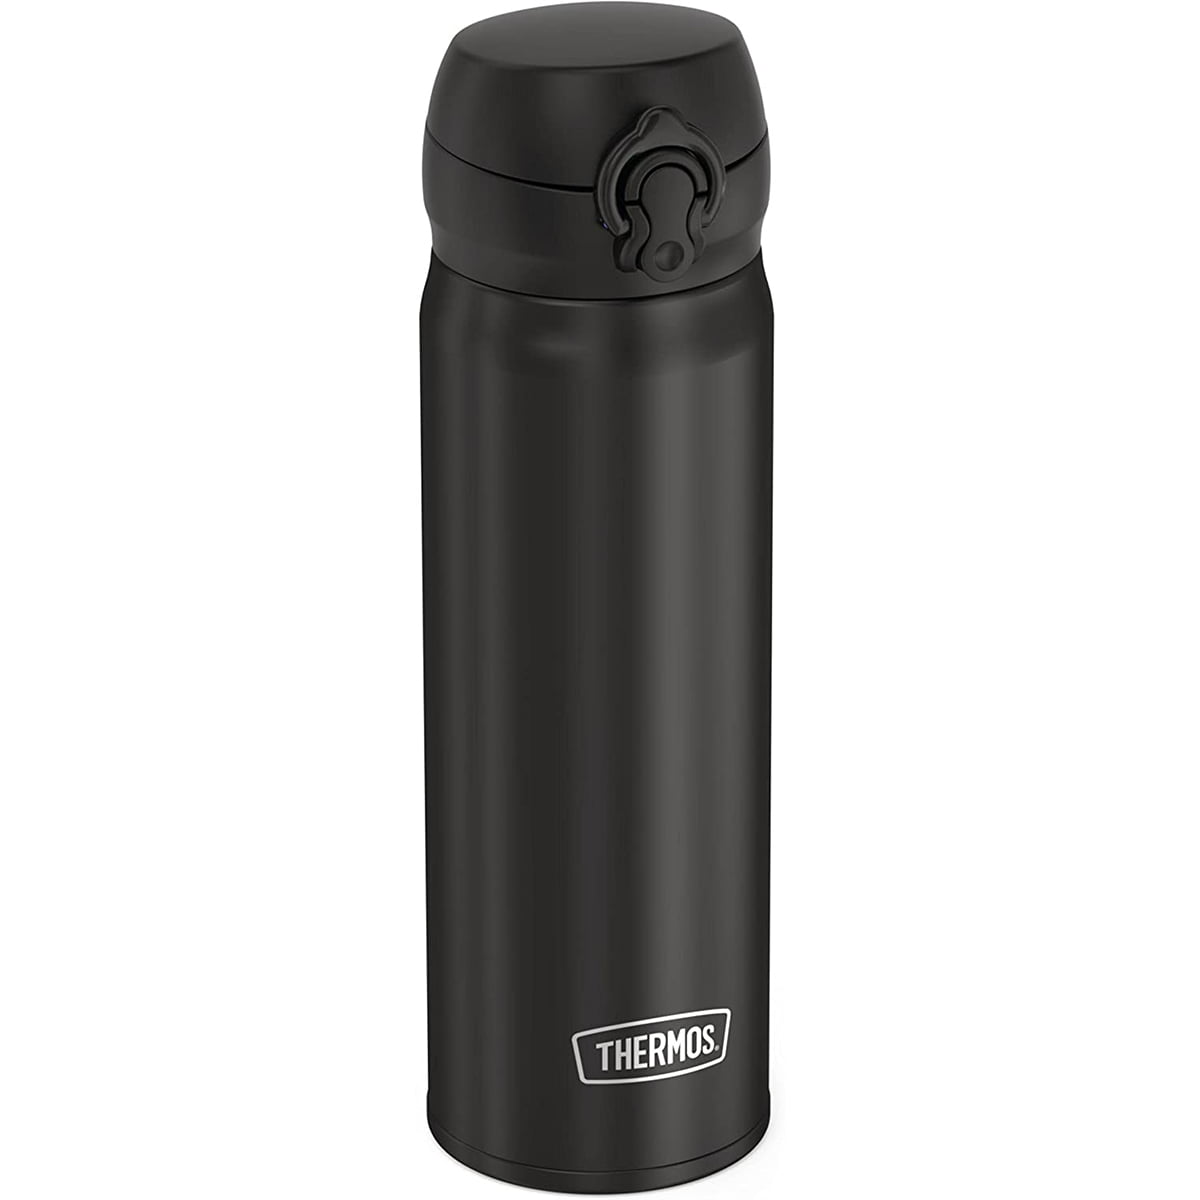 Thermos 16 oz. Vacuum Insulated Stainless Steel Direct Drink Bottle - Black  